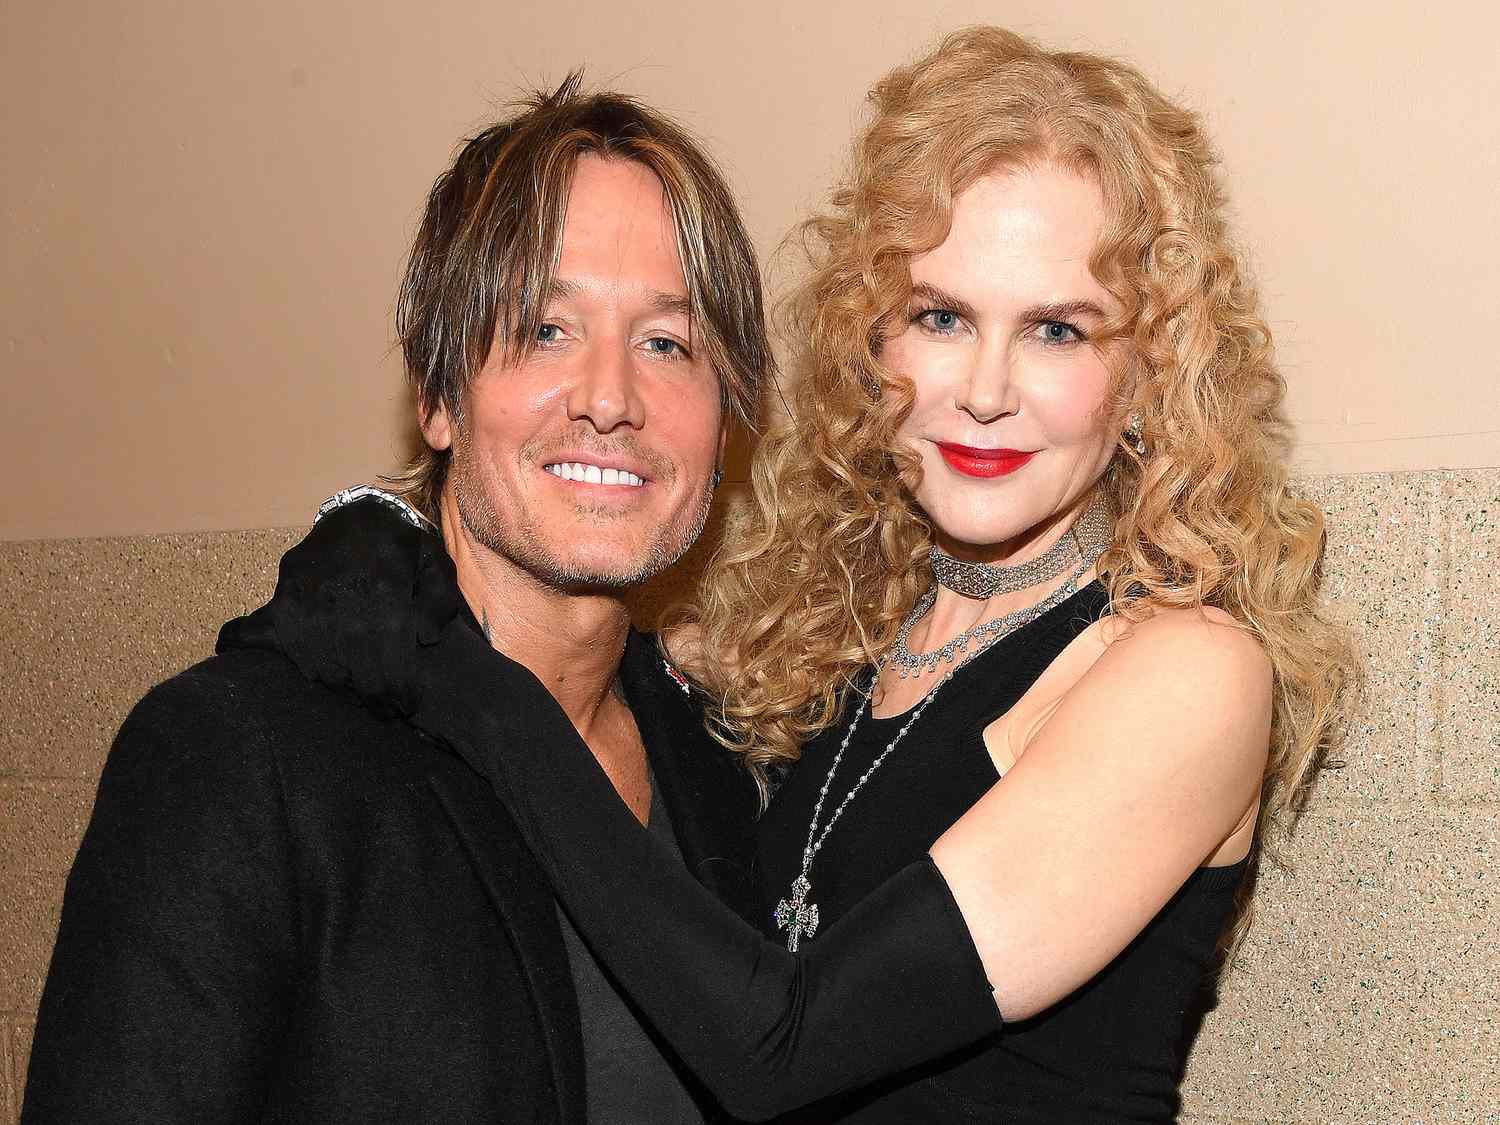 Keith Urban and Nicole Kidman backstage during the 36th Annual Rock & Roll Hall Of Fame Induction Ceremony at Rocket Mortgage Fieldhouse on October 30, 2021 in Cleveland, Ohio